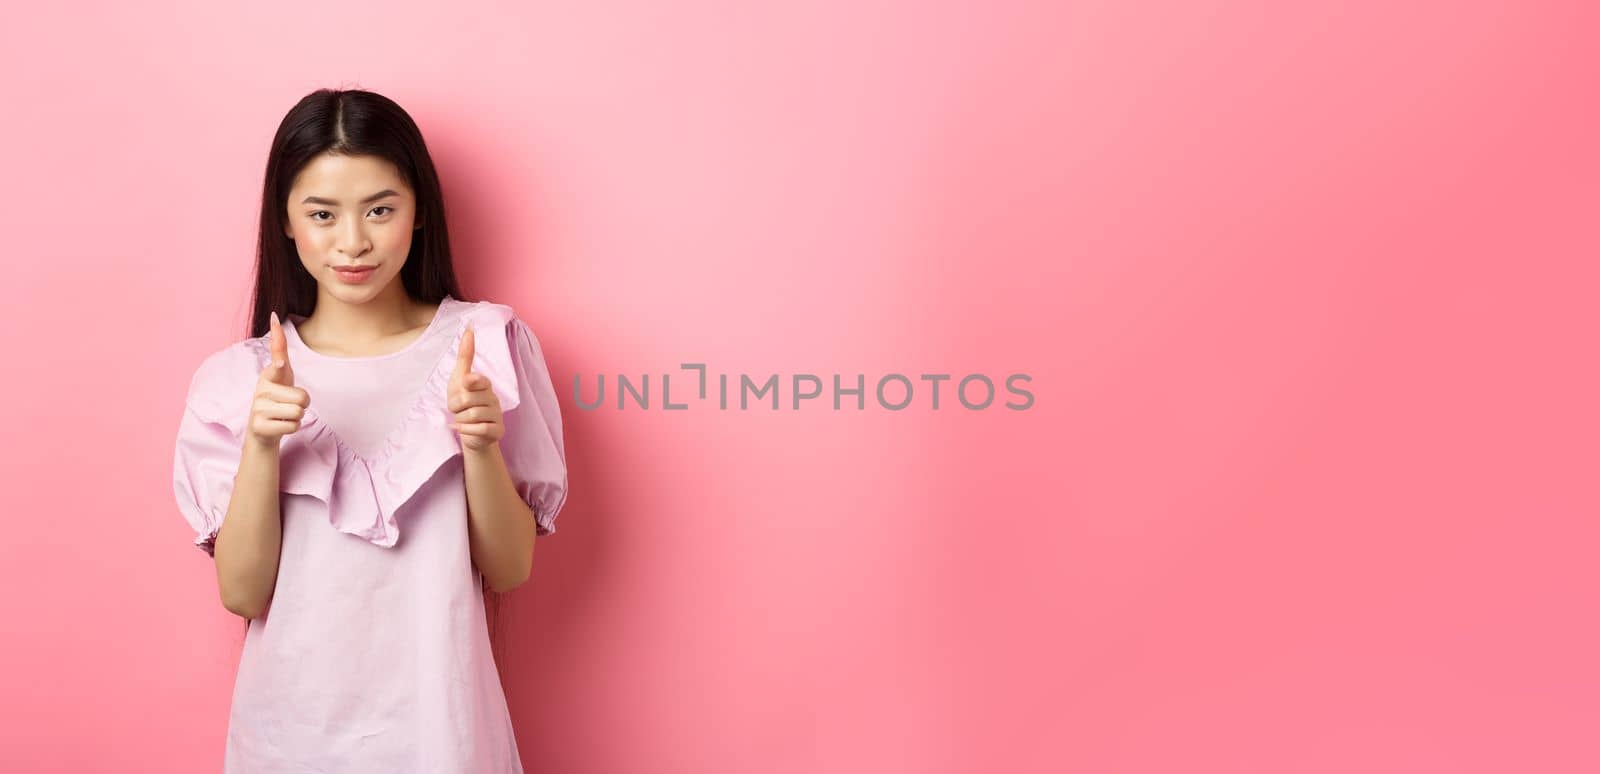 Sassy asian woman pointing at camera, smiling and inviting you, beckon or praise person, standing on pink background.